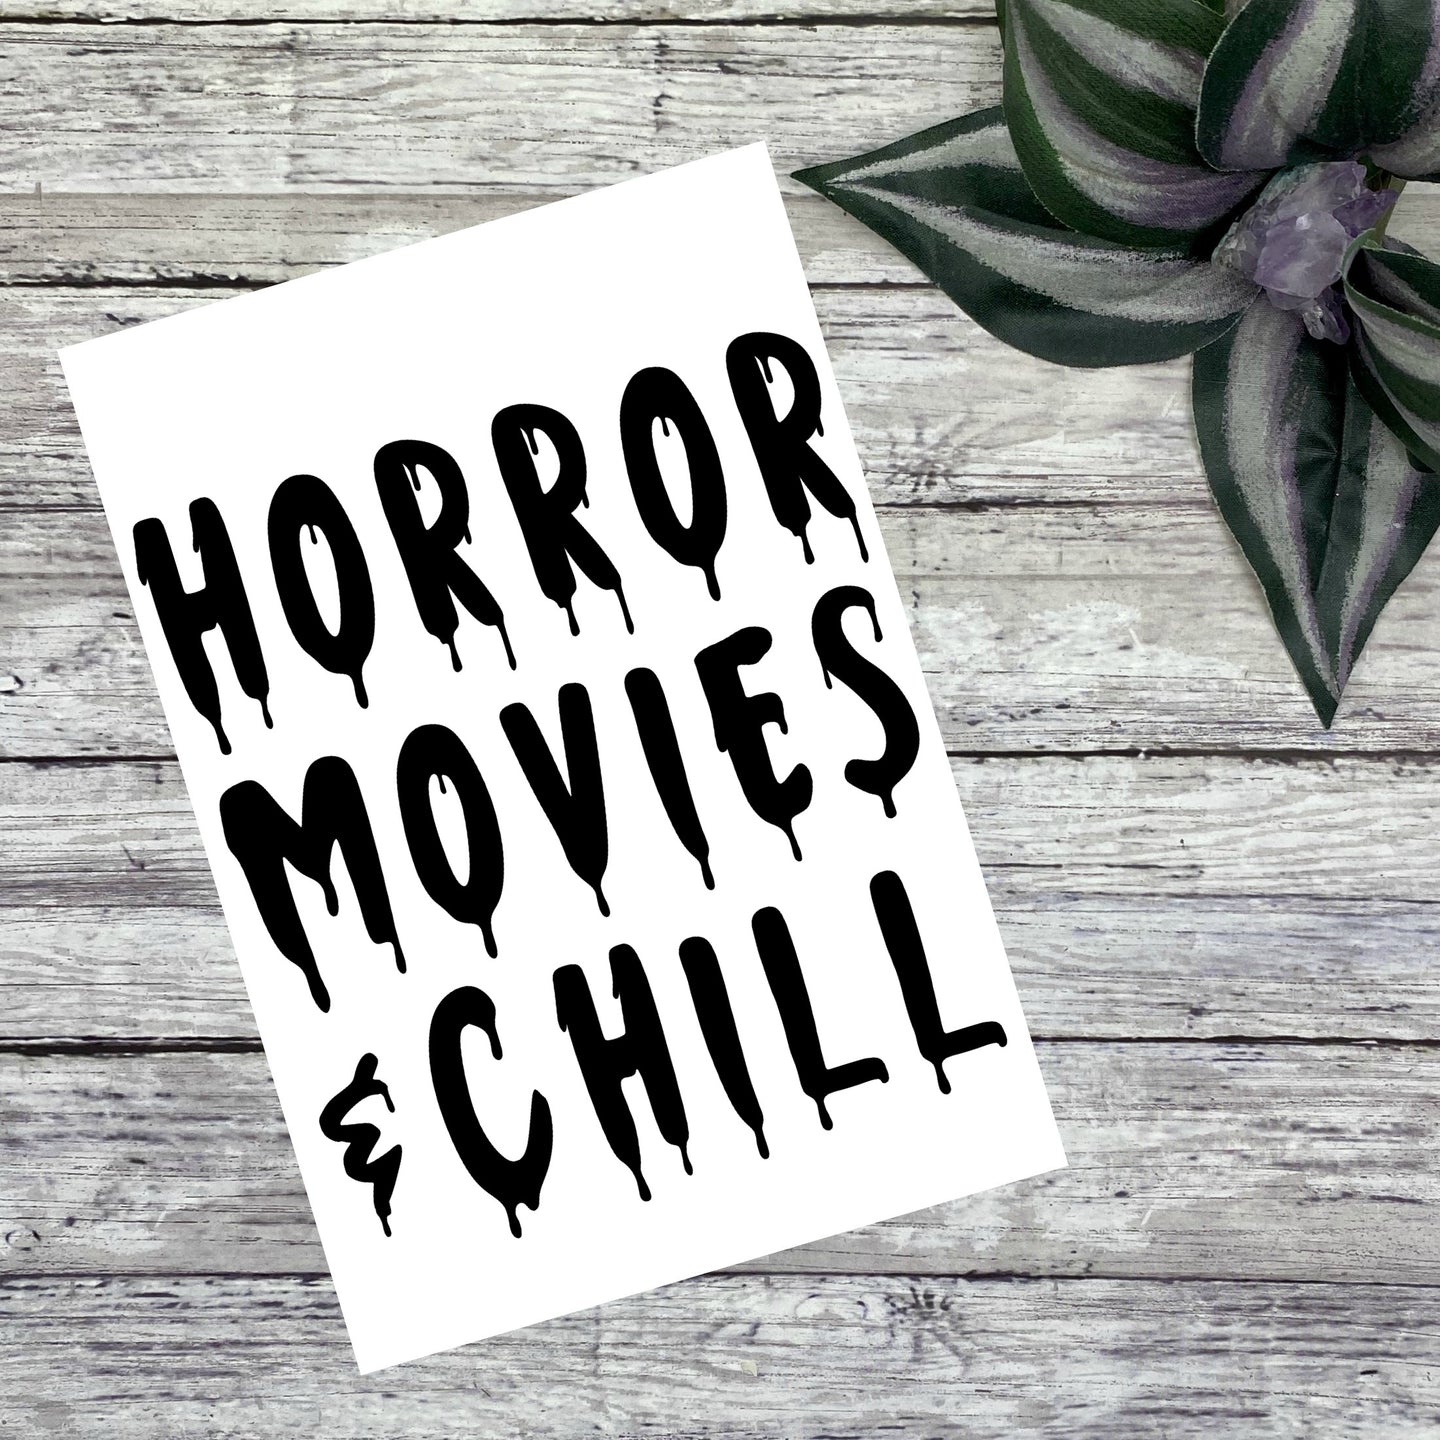 Horror Movies & Chill Vinyl Decal